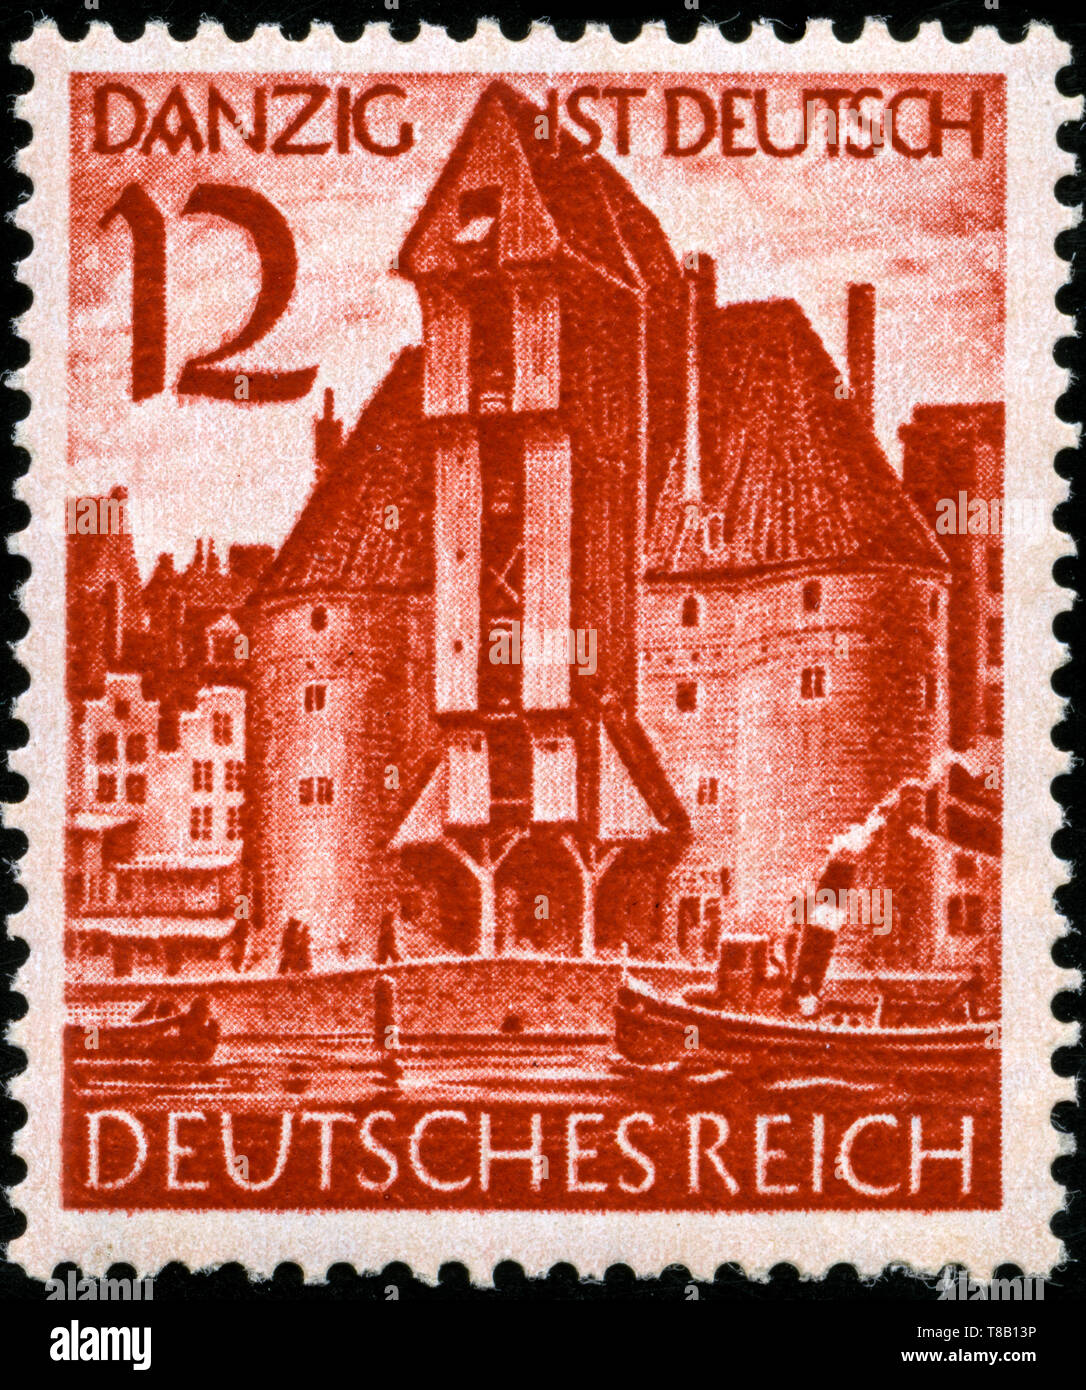 Postage stamp from the German Realm in the Reintegration of Danzig in the German Reich series issued in 1939 Stock Photo